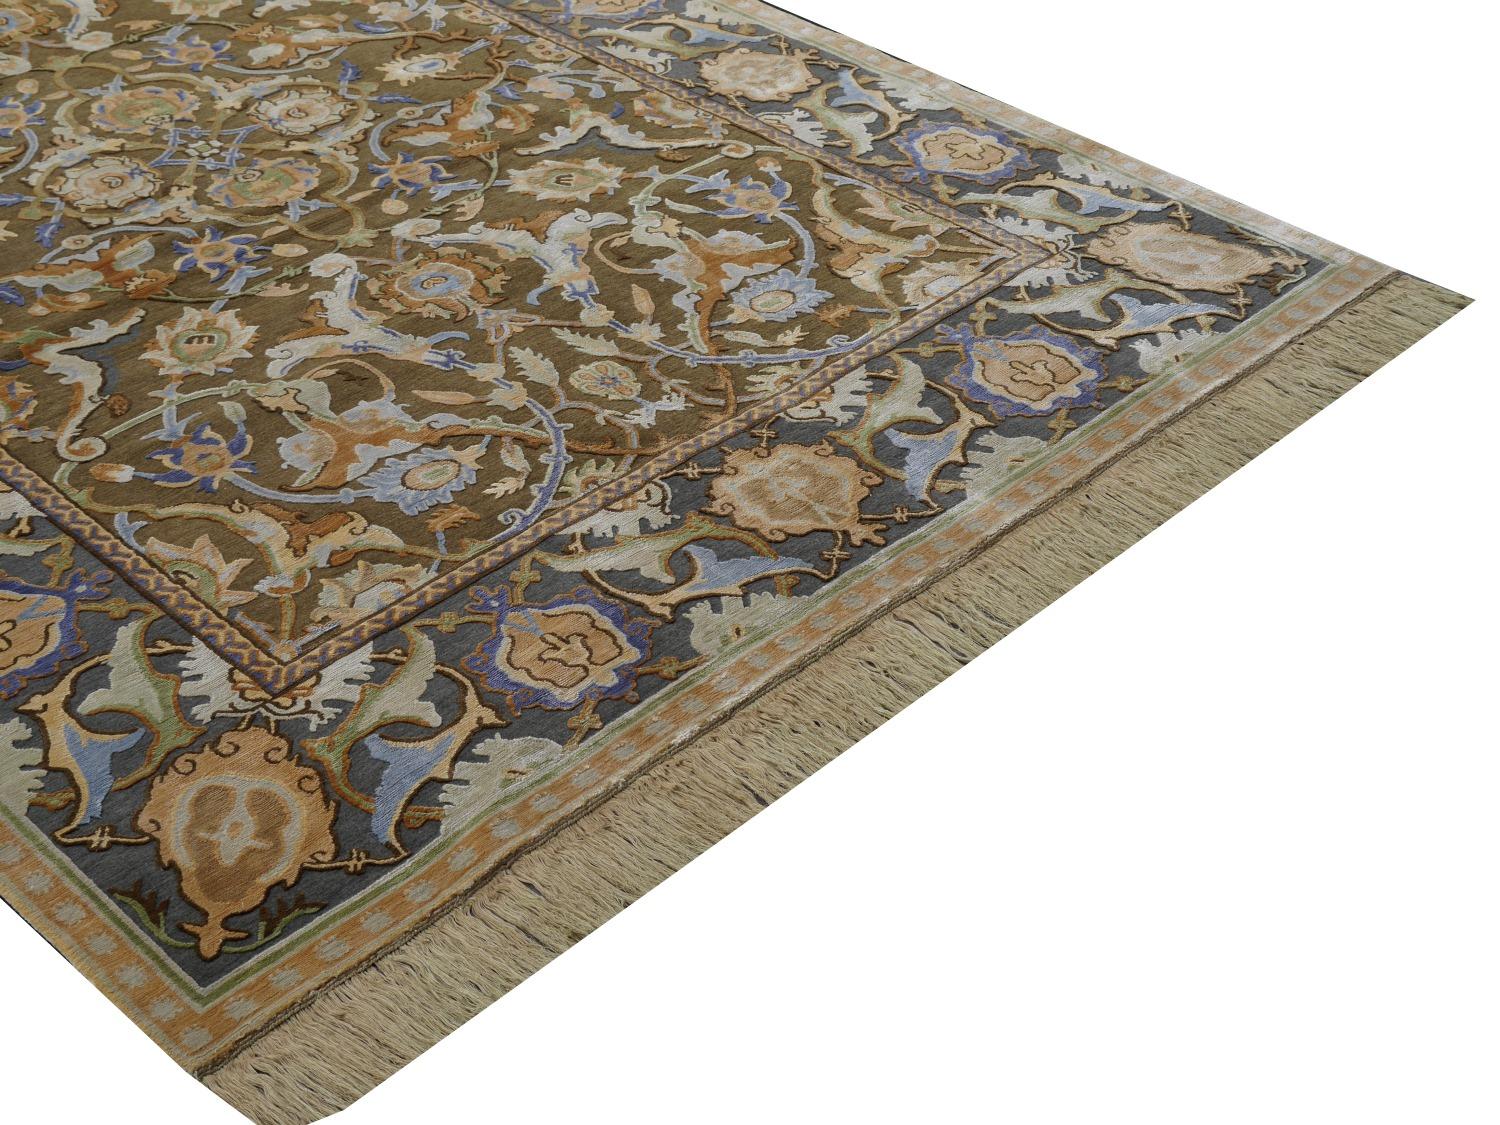 A beautiful new and made to order Polonaise carpet, hand knotted using finest Chinese mulberry silk and Tibetan Highland Wool. 

The design features typical elements of the Persian Safavid period in late 17th century, when the original rug was hand